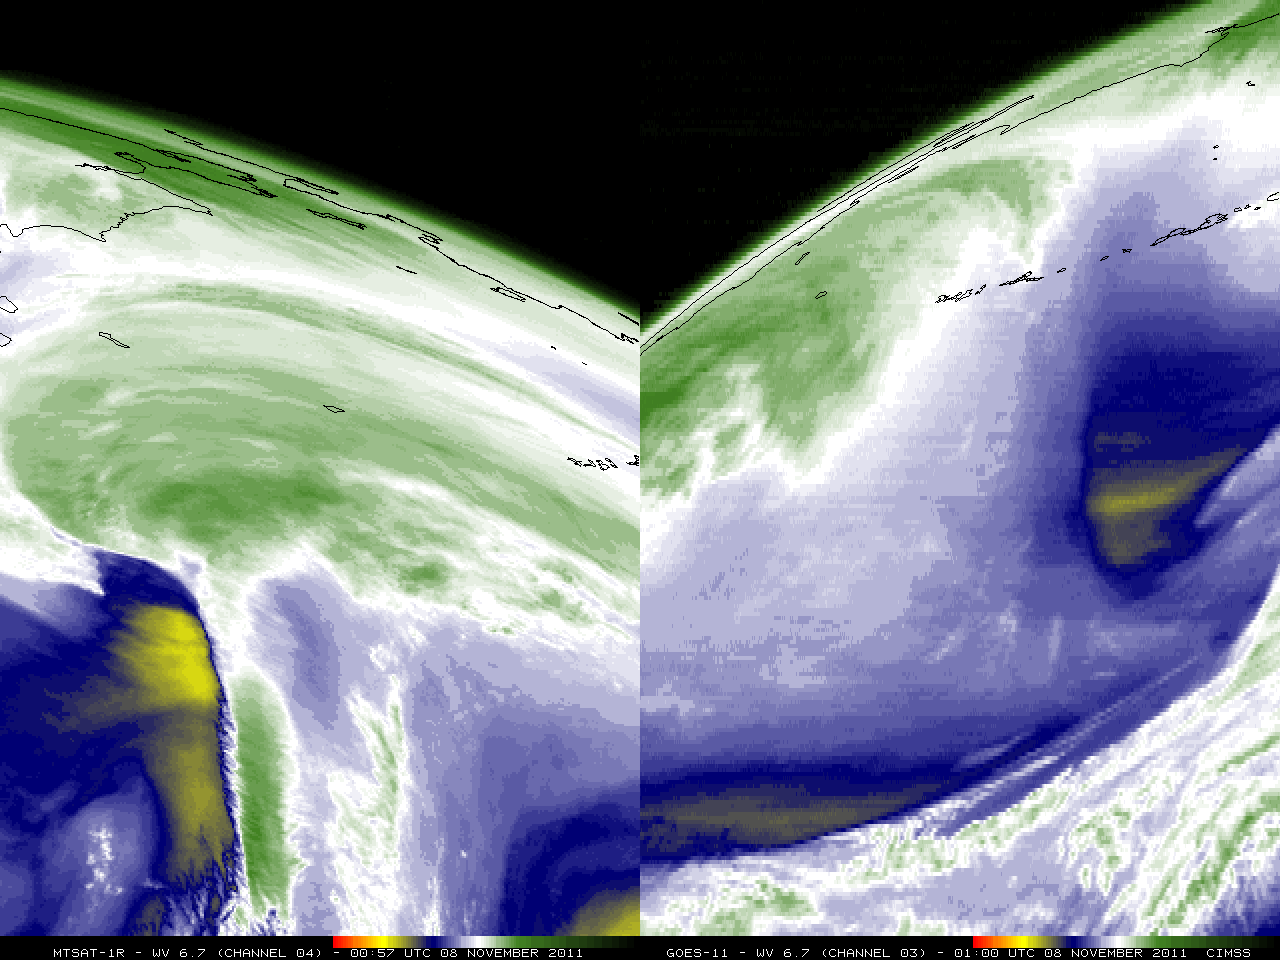 MTSAT-1R (left) and GOES-11 (right) 6.7 Âµm water vapor channel images (click image to play animation)